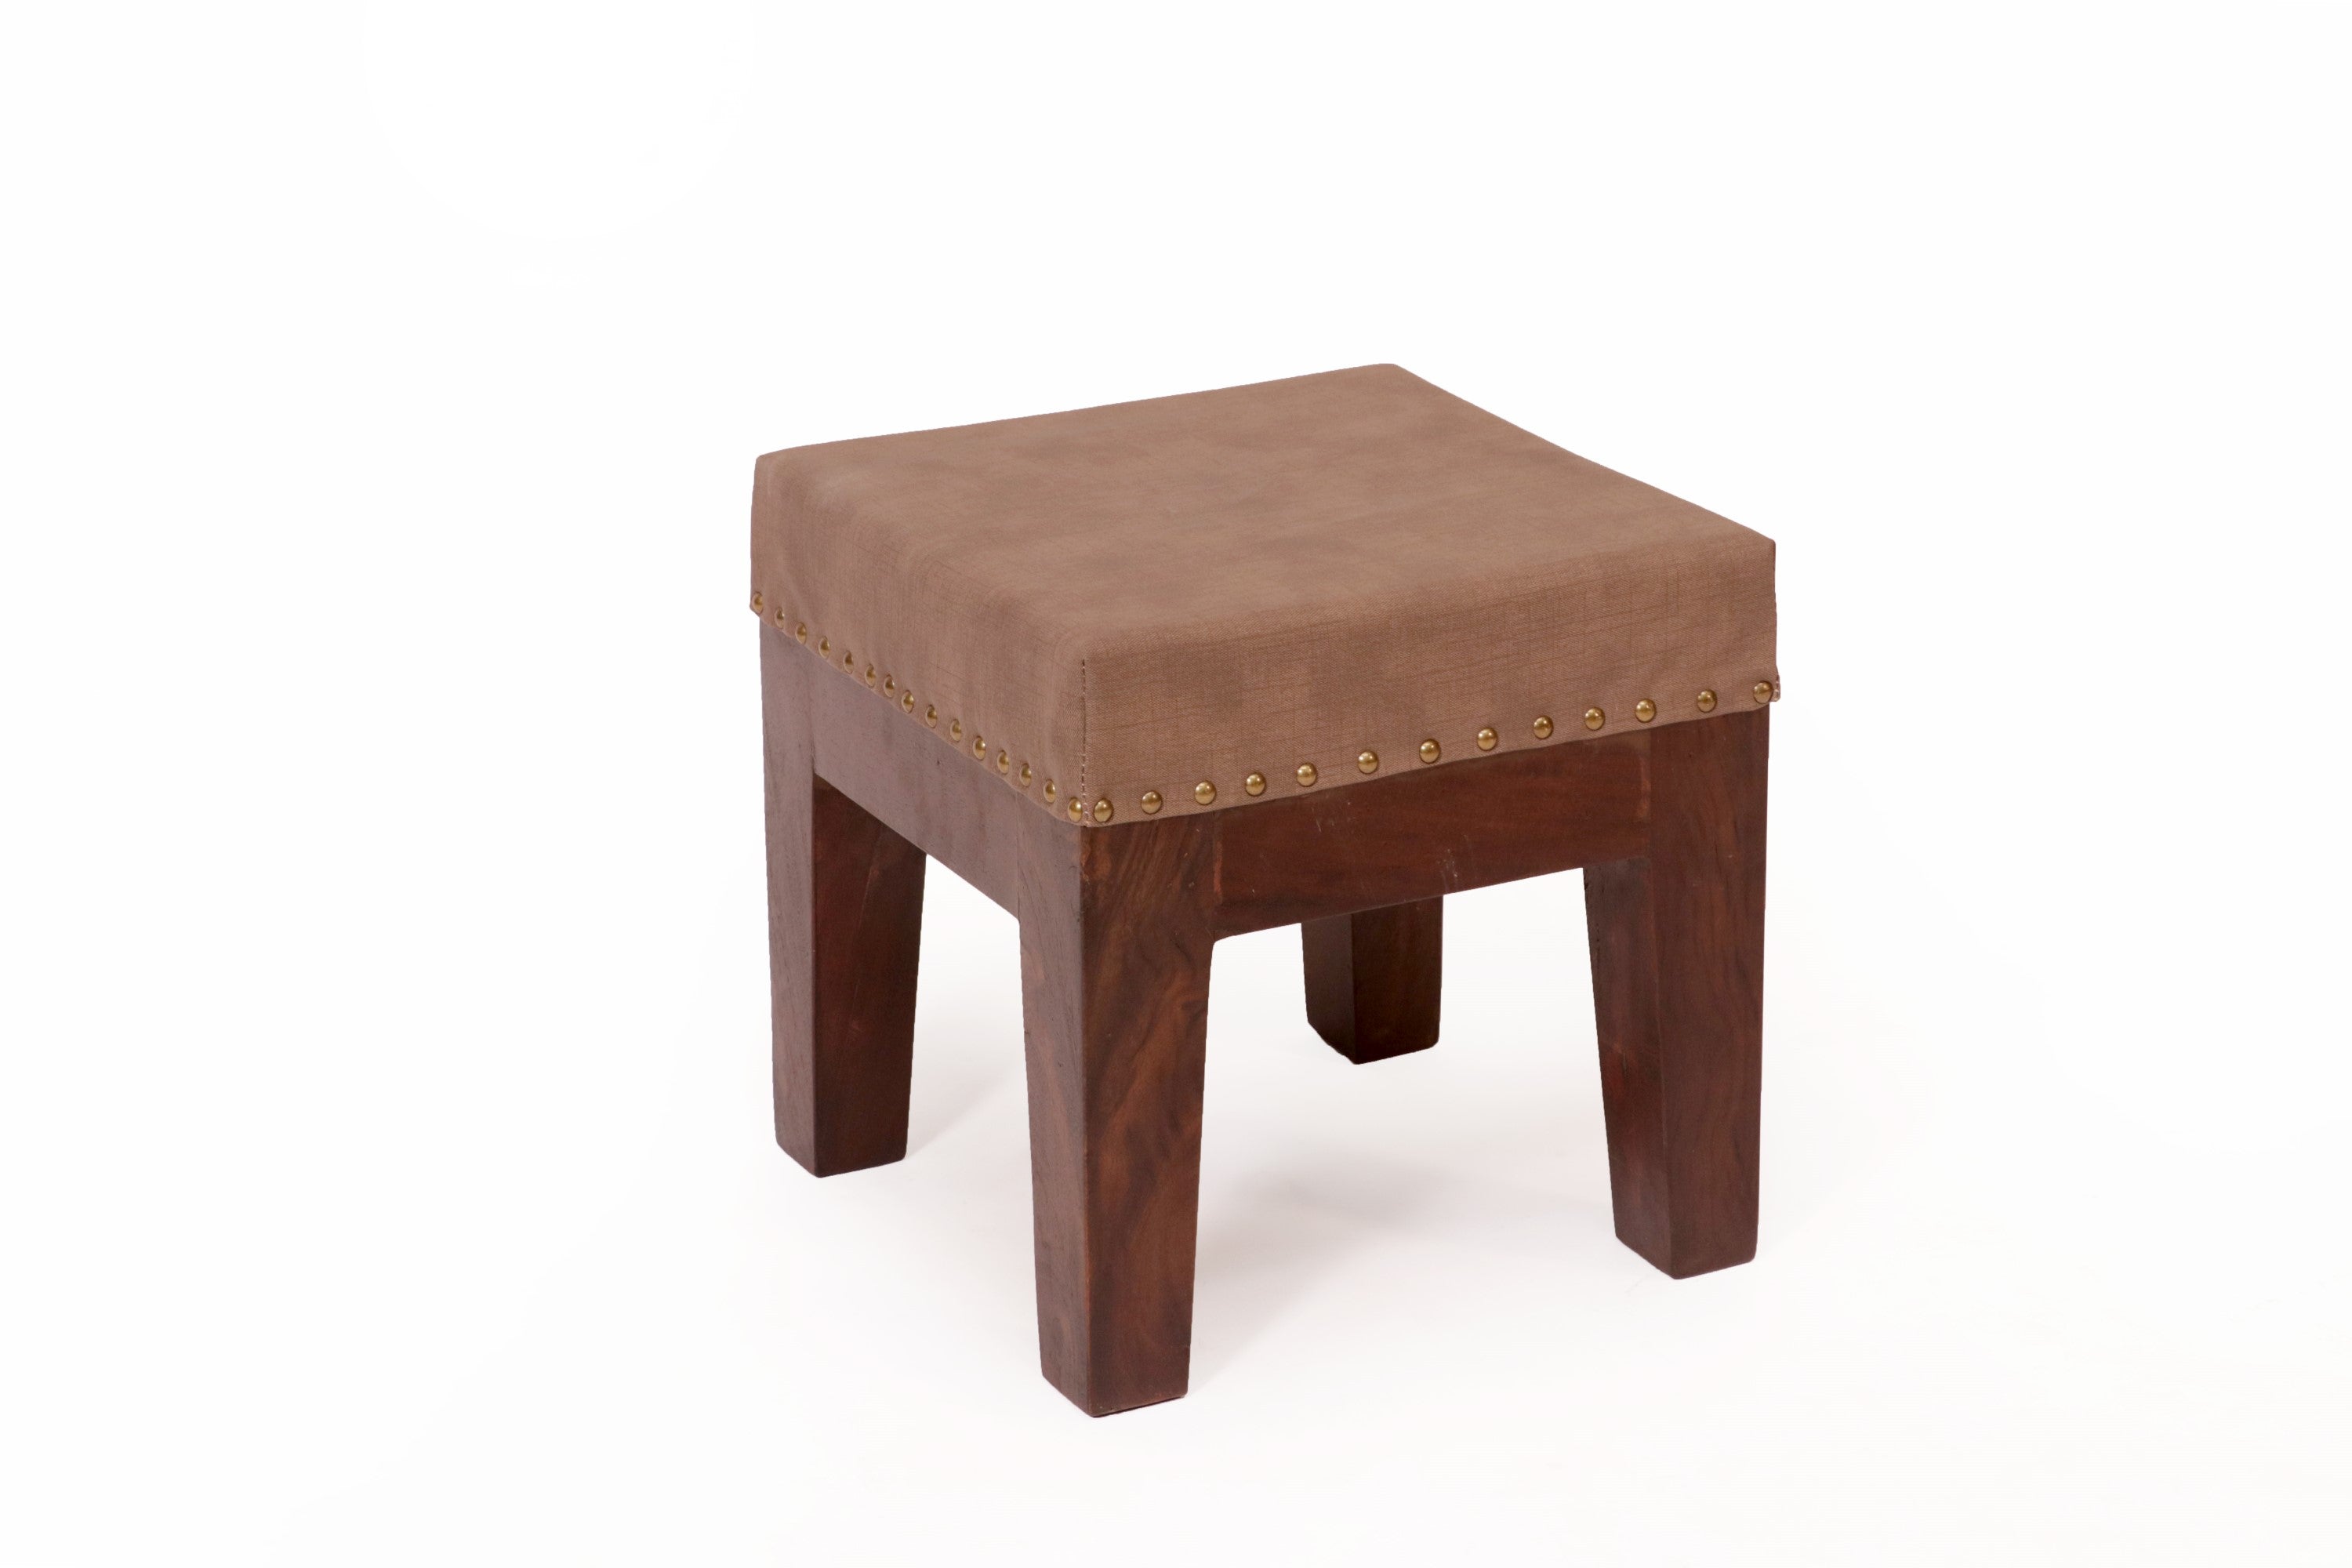 Upholstered Contemporary Stool Stool